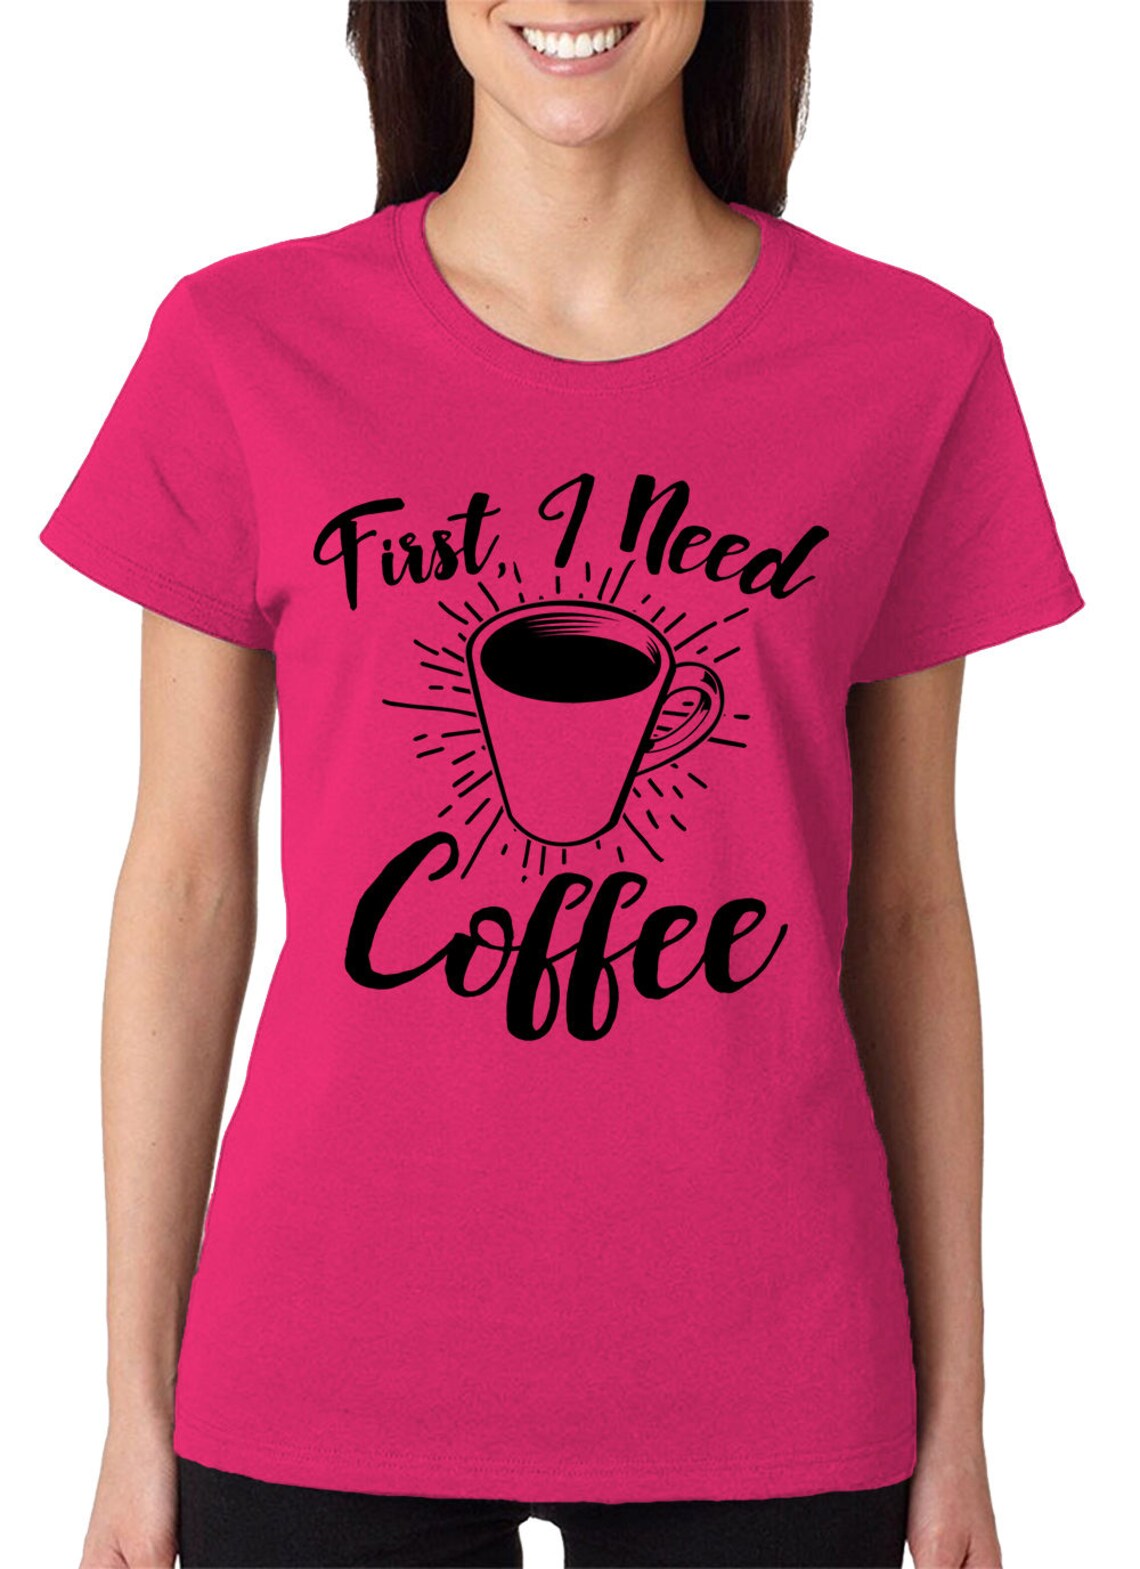 First I Need Coffee Funny Caffeine Addict Cup of Joe Gift - Etsy